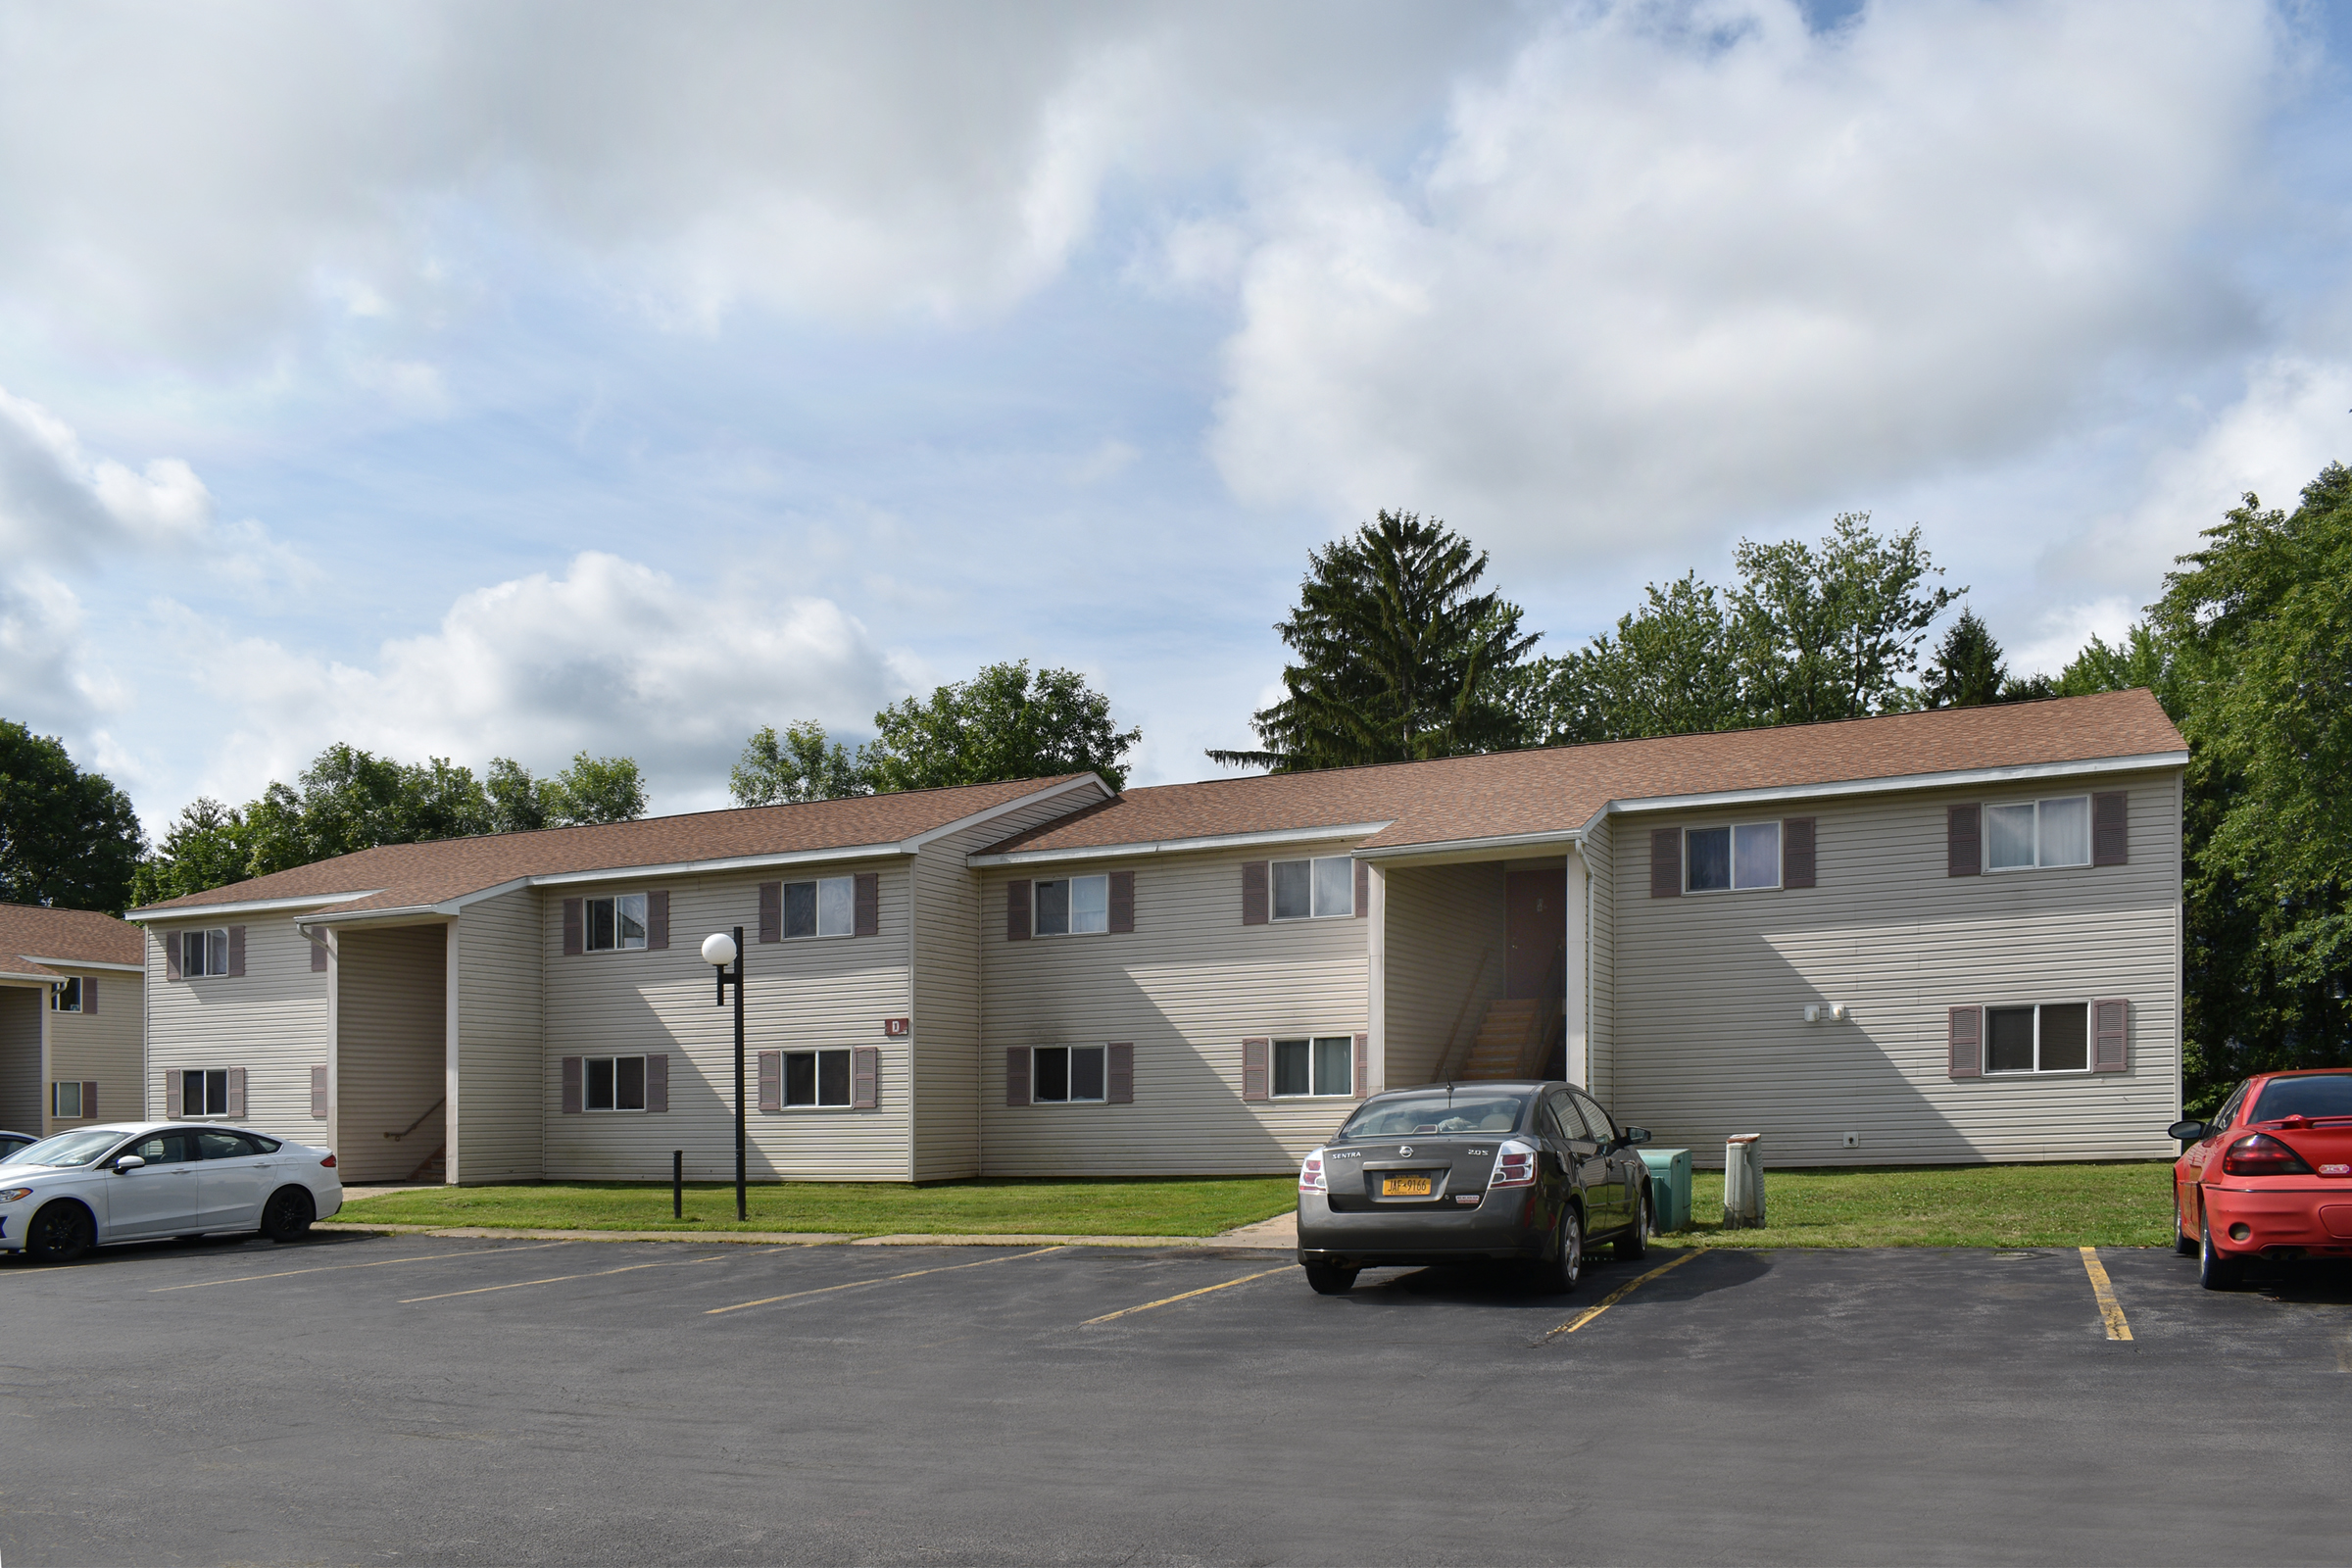 property management company client list syracuse ny side view image of seneca falls apartments